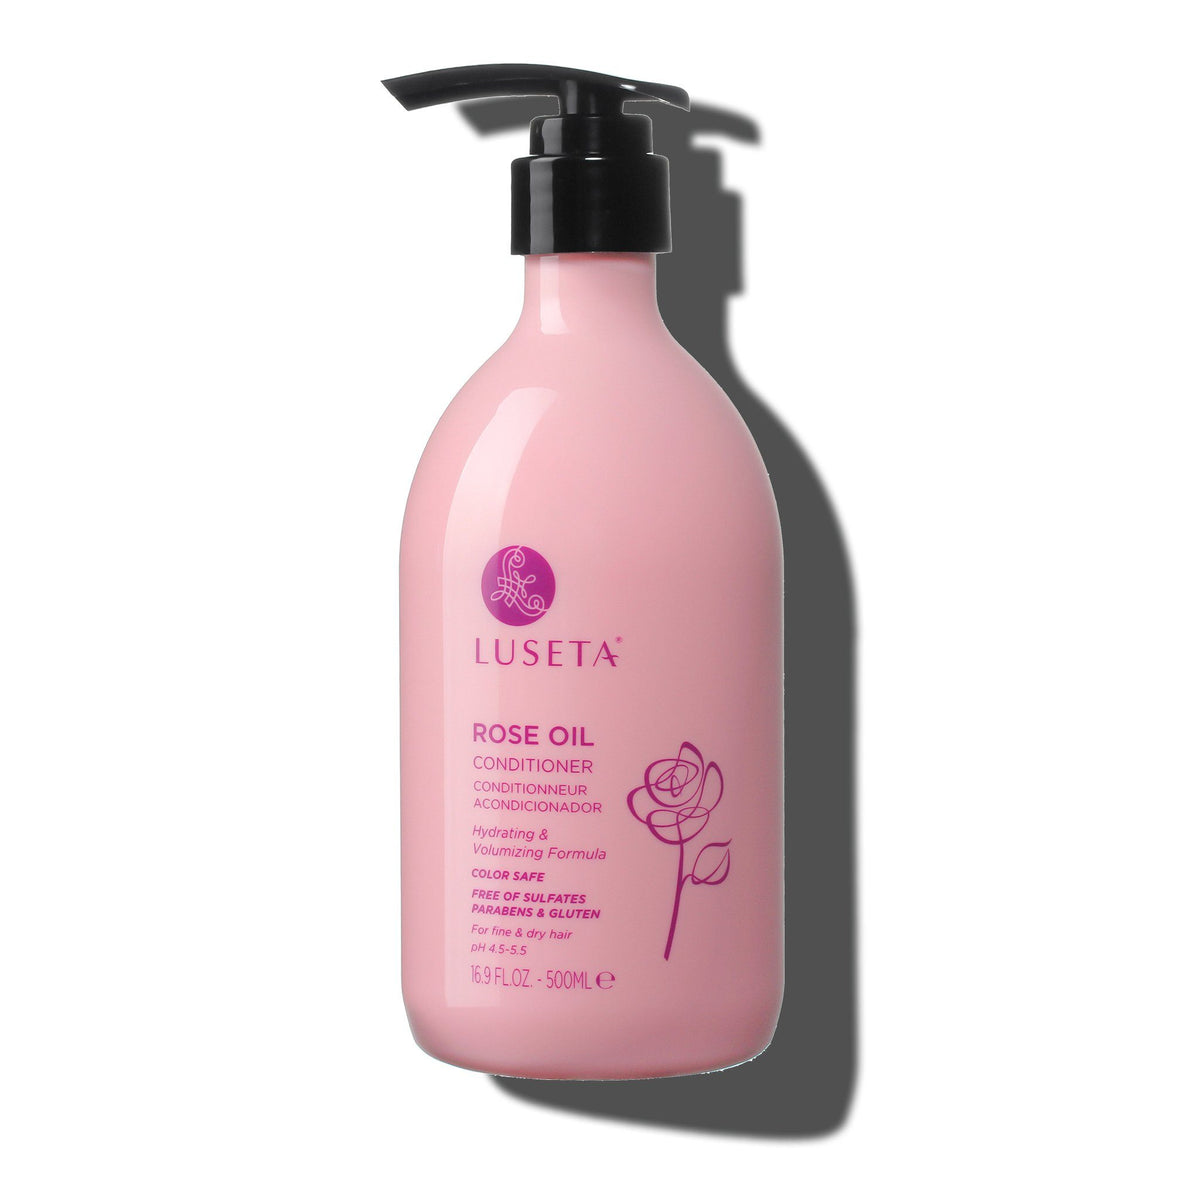 Rose Oil Conditioner - 16.9oz - by Luseta Beauty |ProCare Outlet|